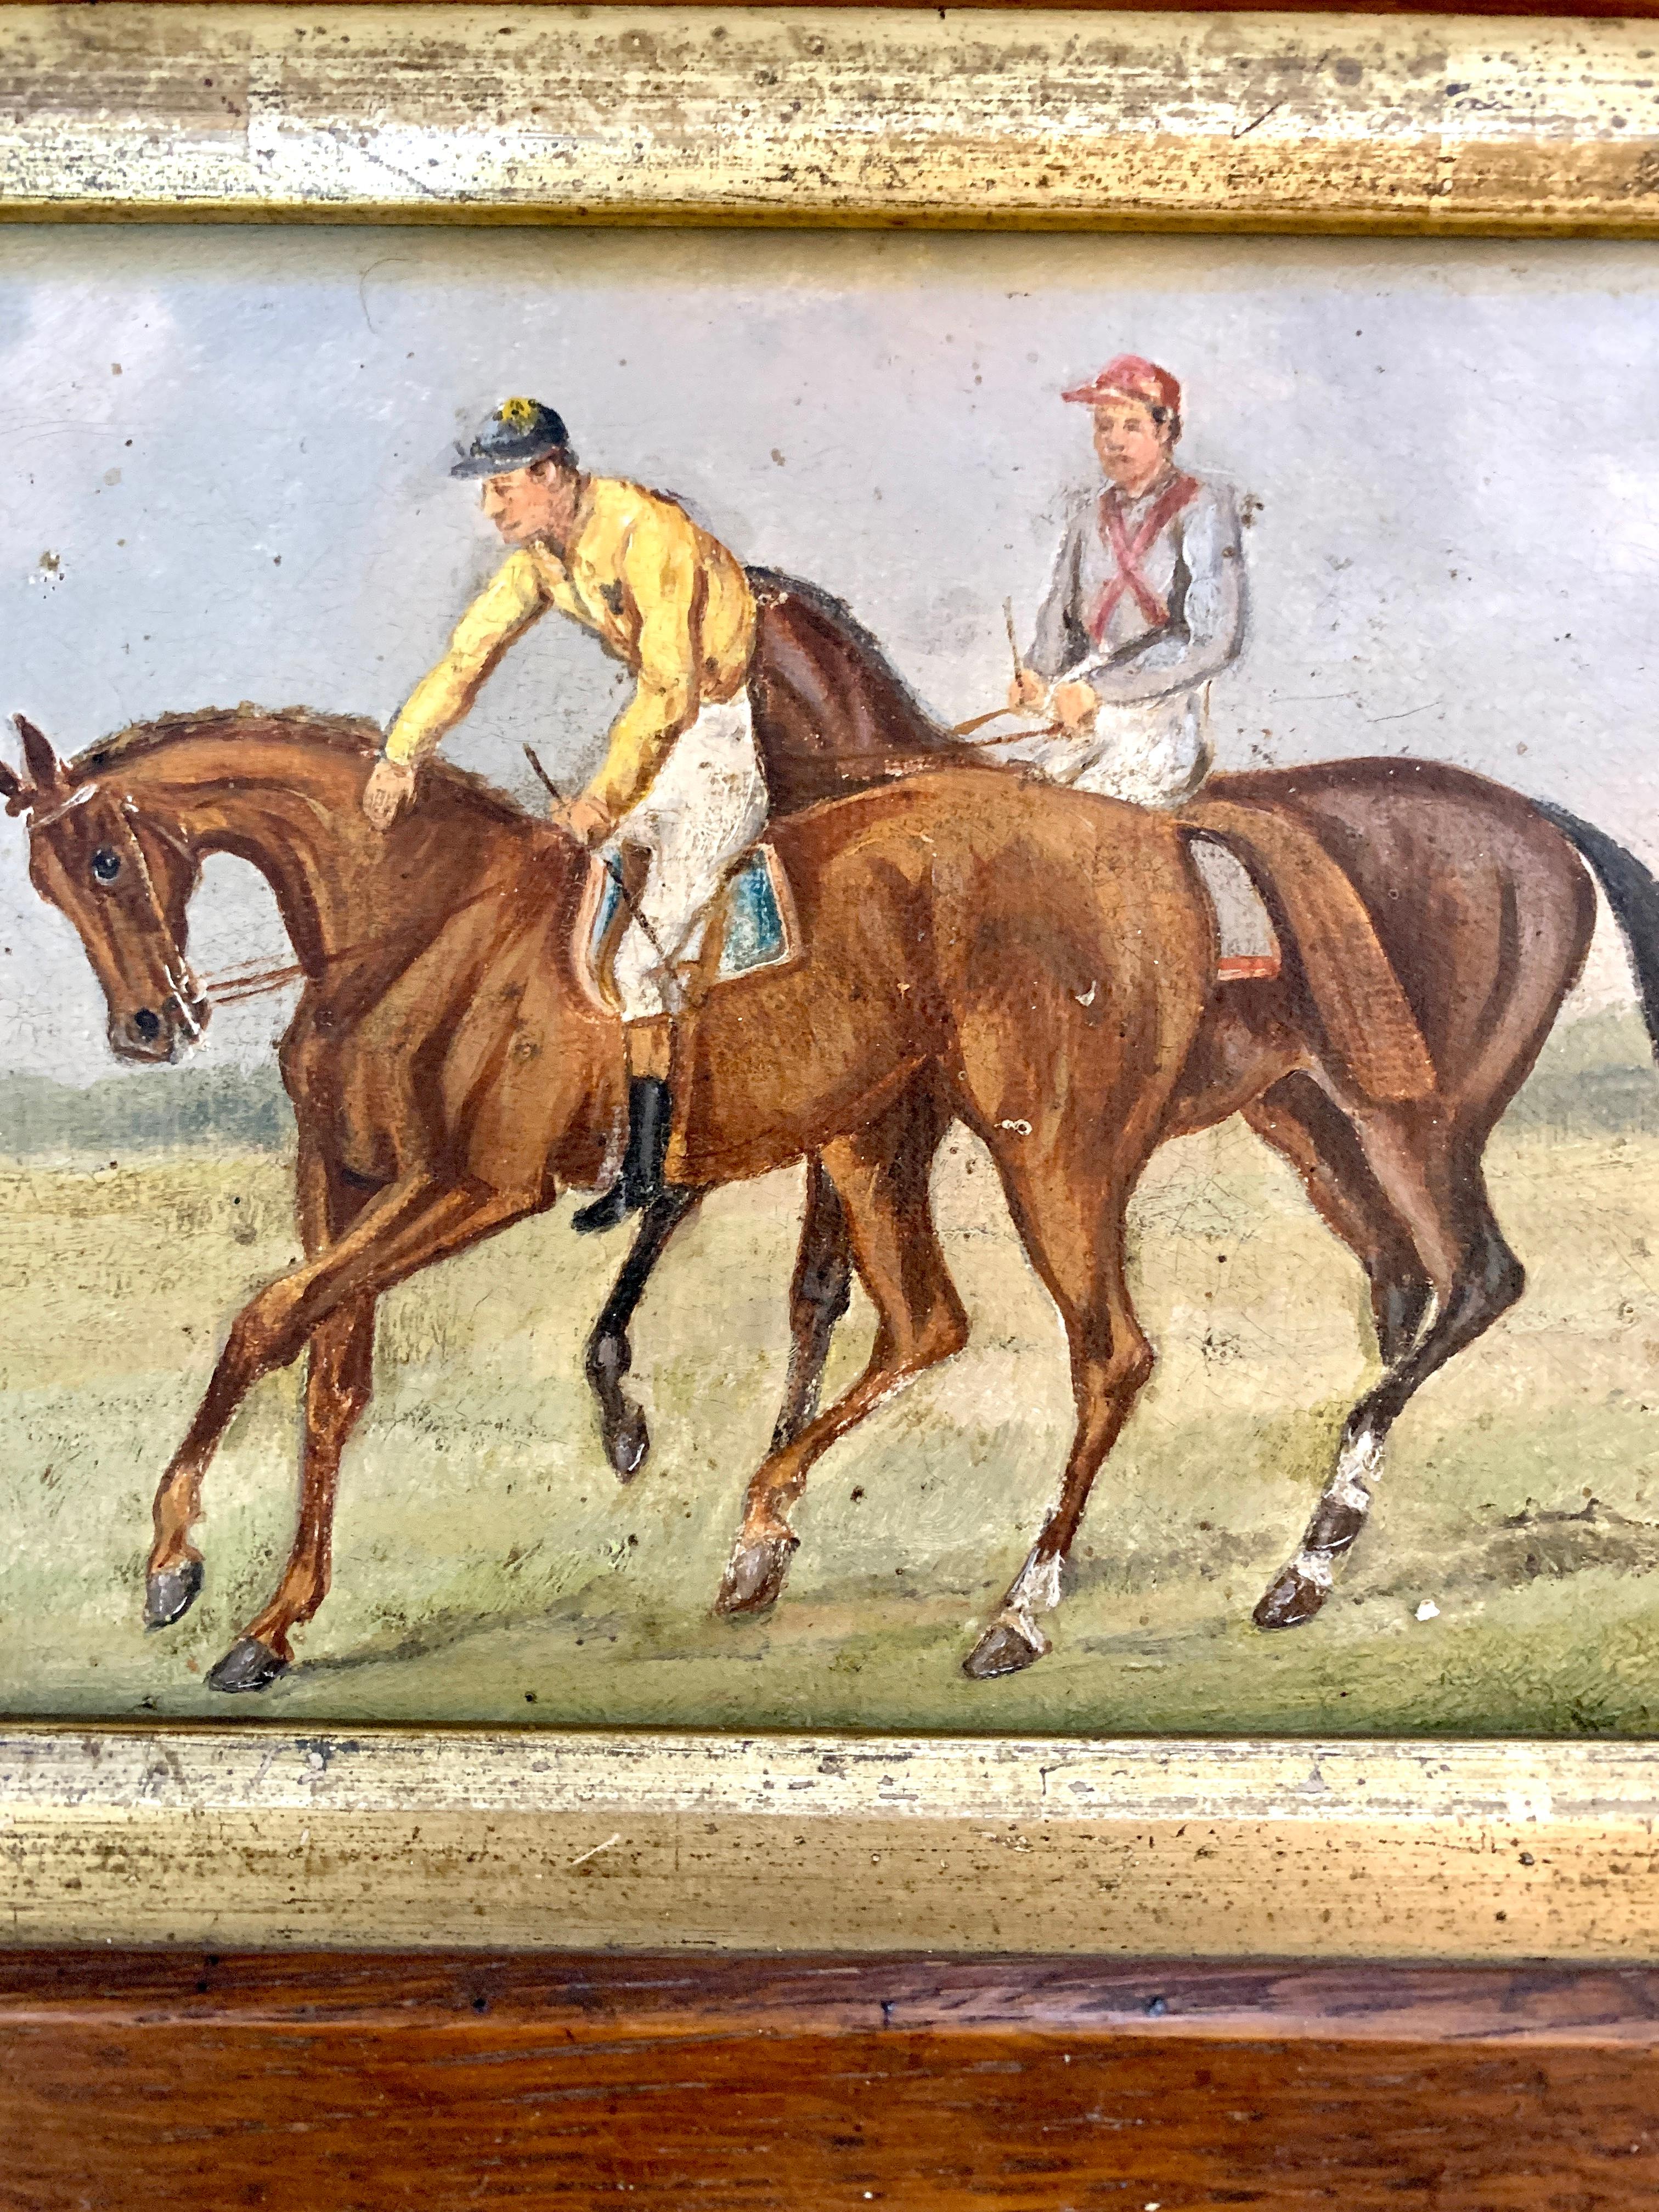 19th century English Horse racing scene with jockeys on horse back in landscape - Painting by Unknown